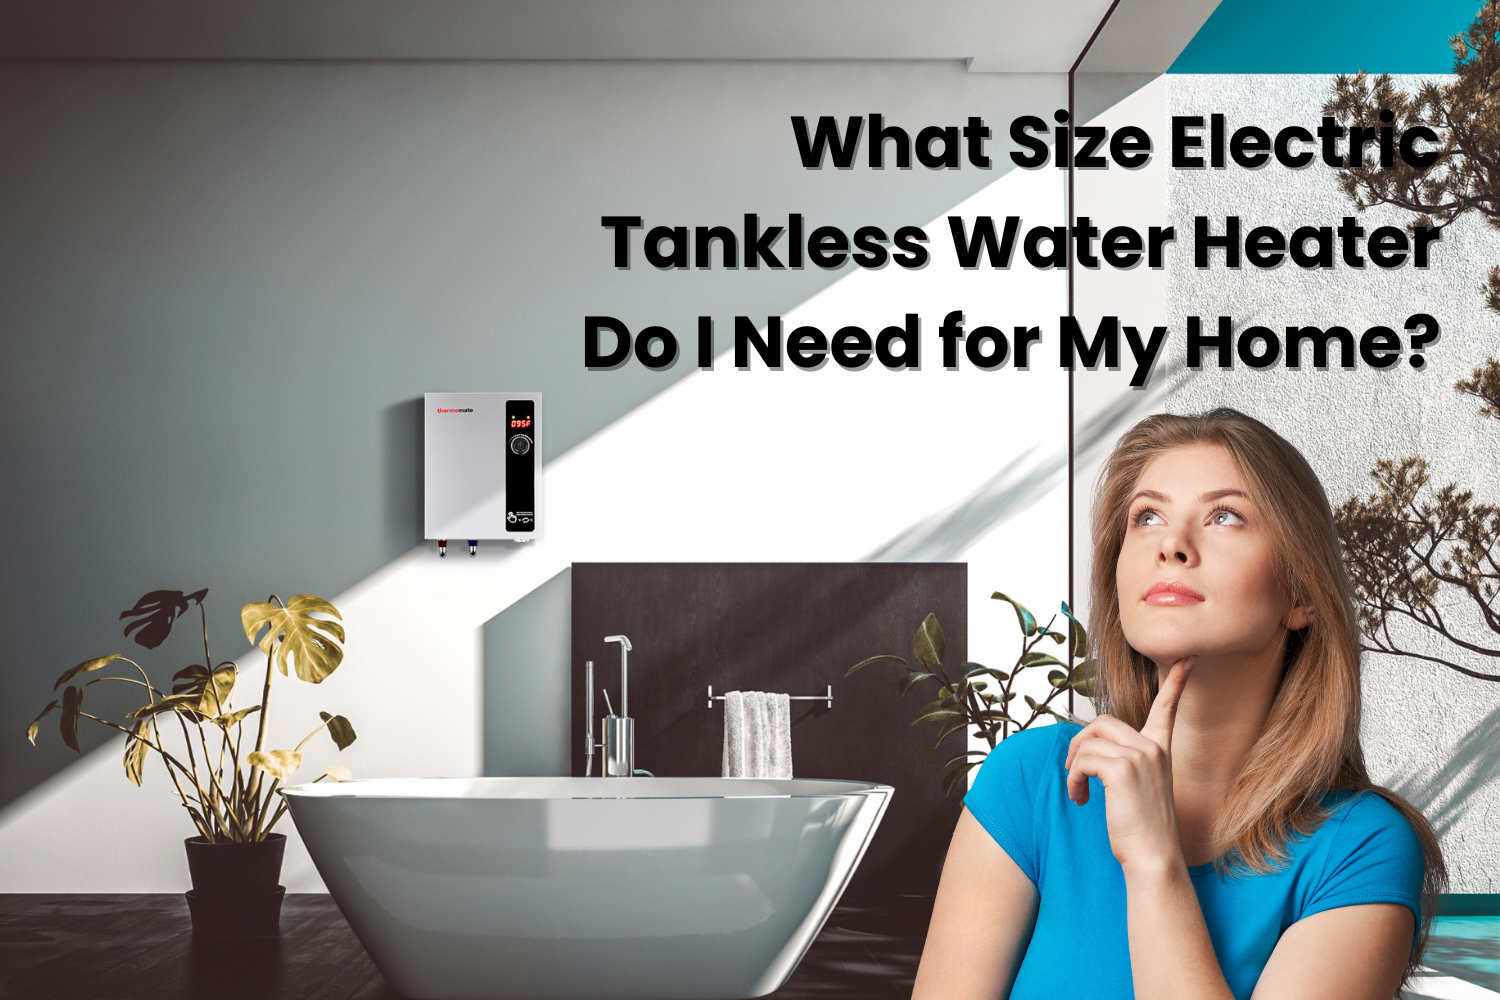 What Size Electric Tankless Water Heater Do I Need for My Home?